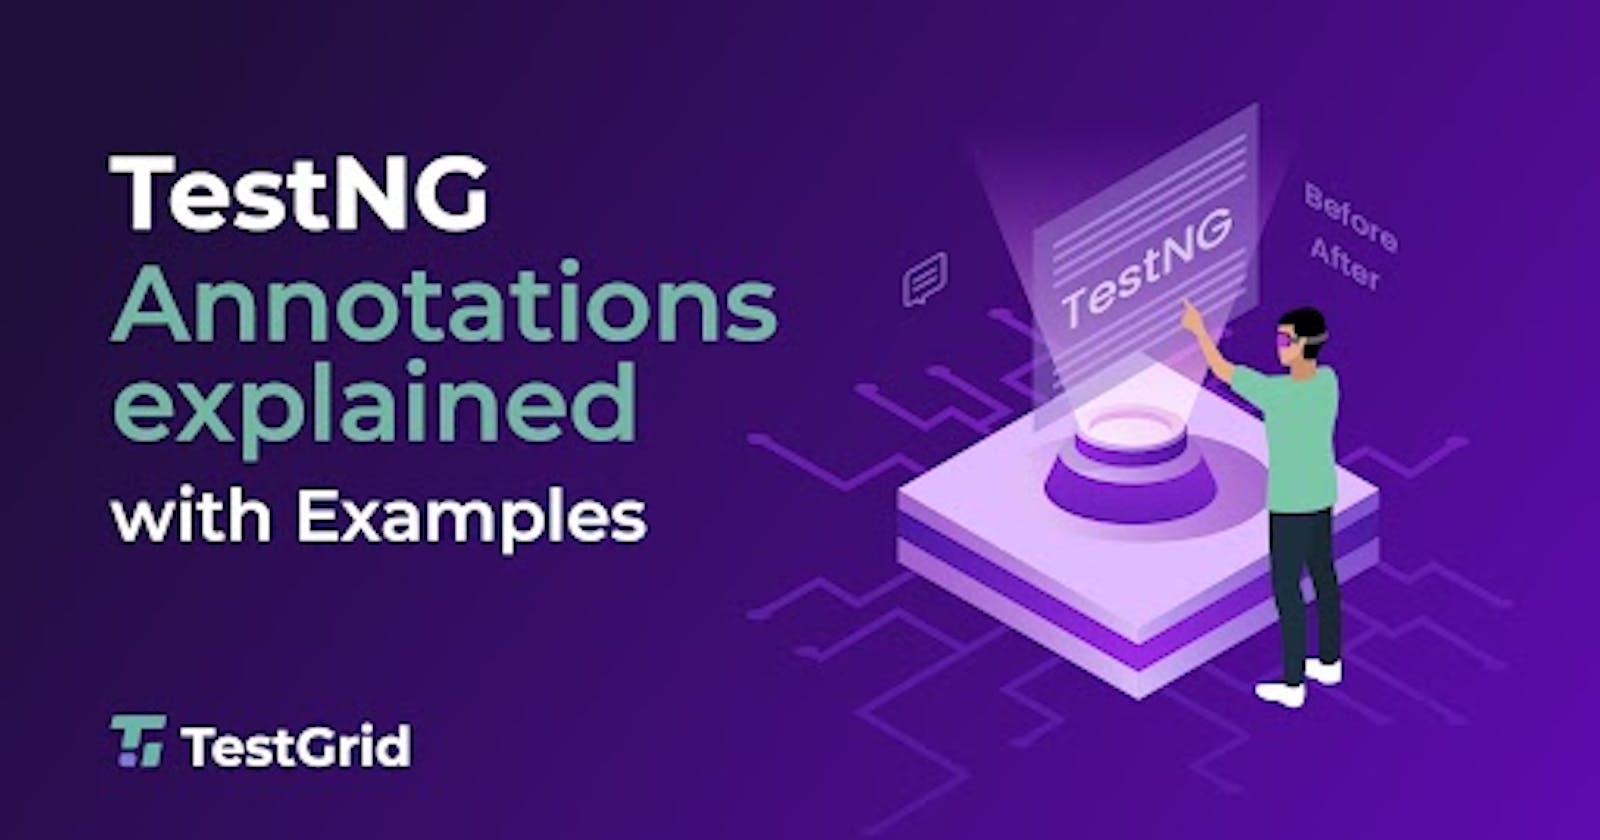 TestNG Annotations - Benefits, Hierarchy & Use cases